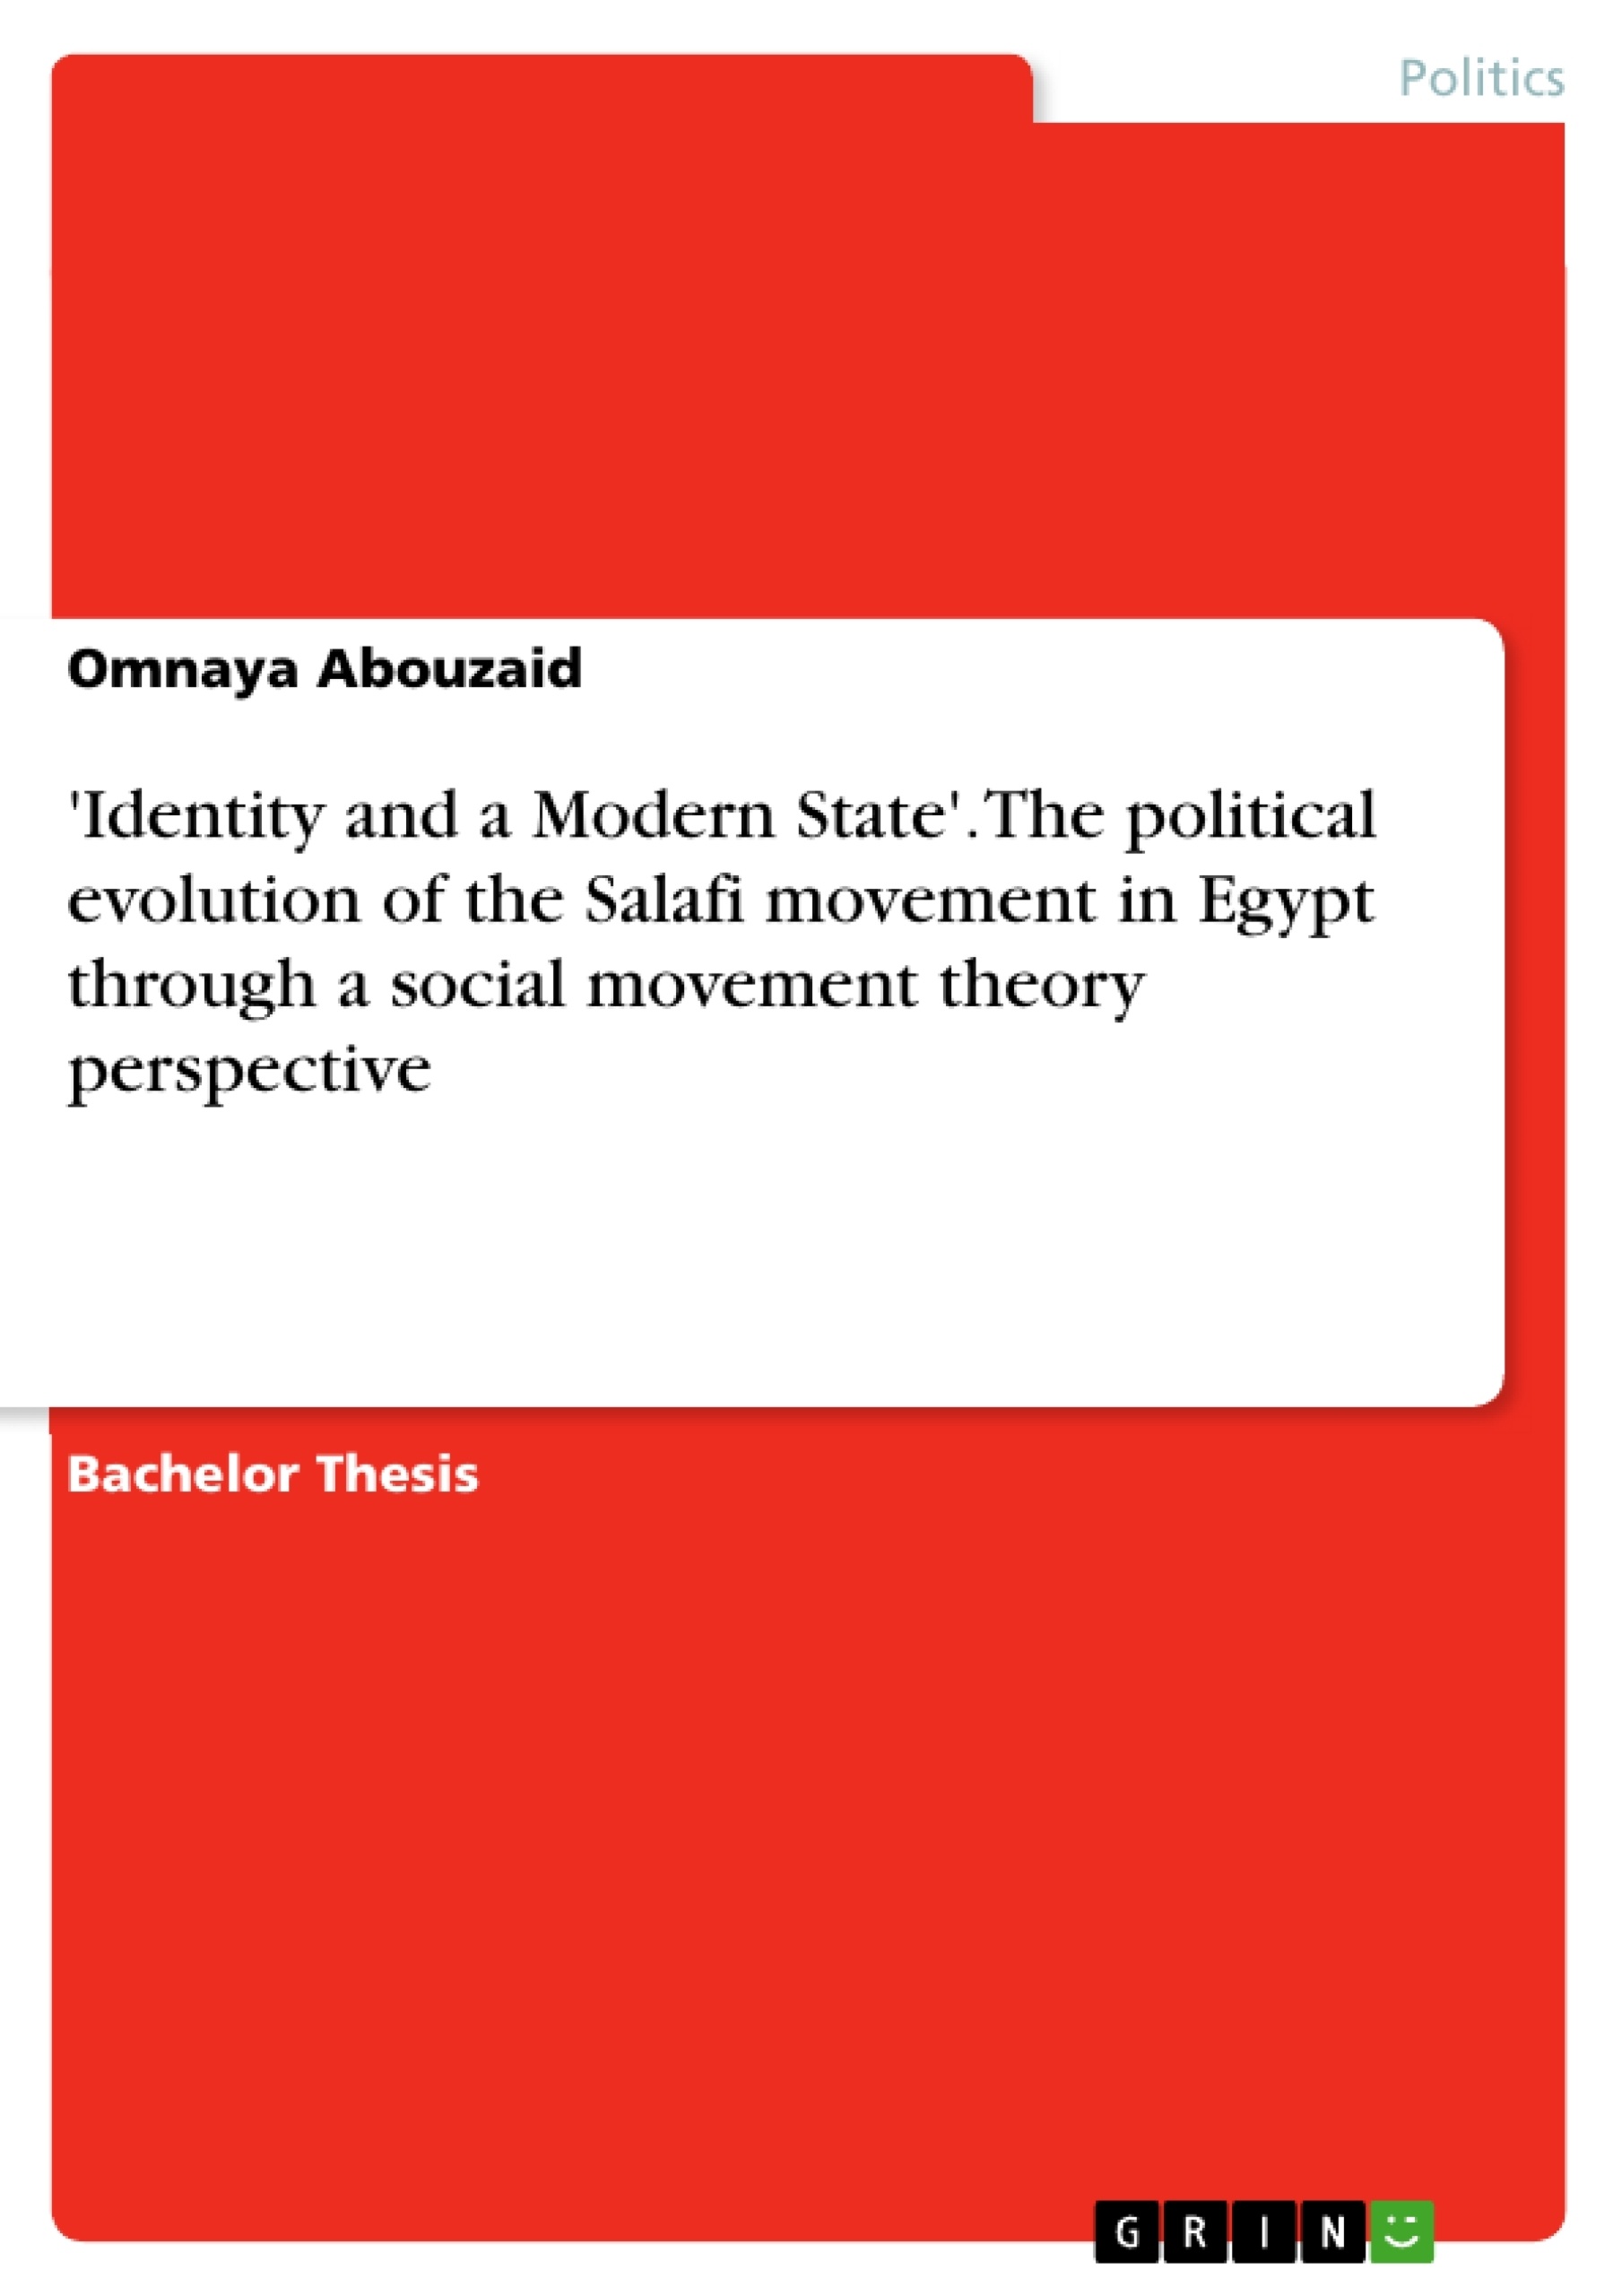 Titre: 'Identity and a Modern State'. The political evolution of the Salafi movement in Egypt through a social movement theory perspective